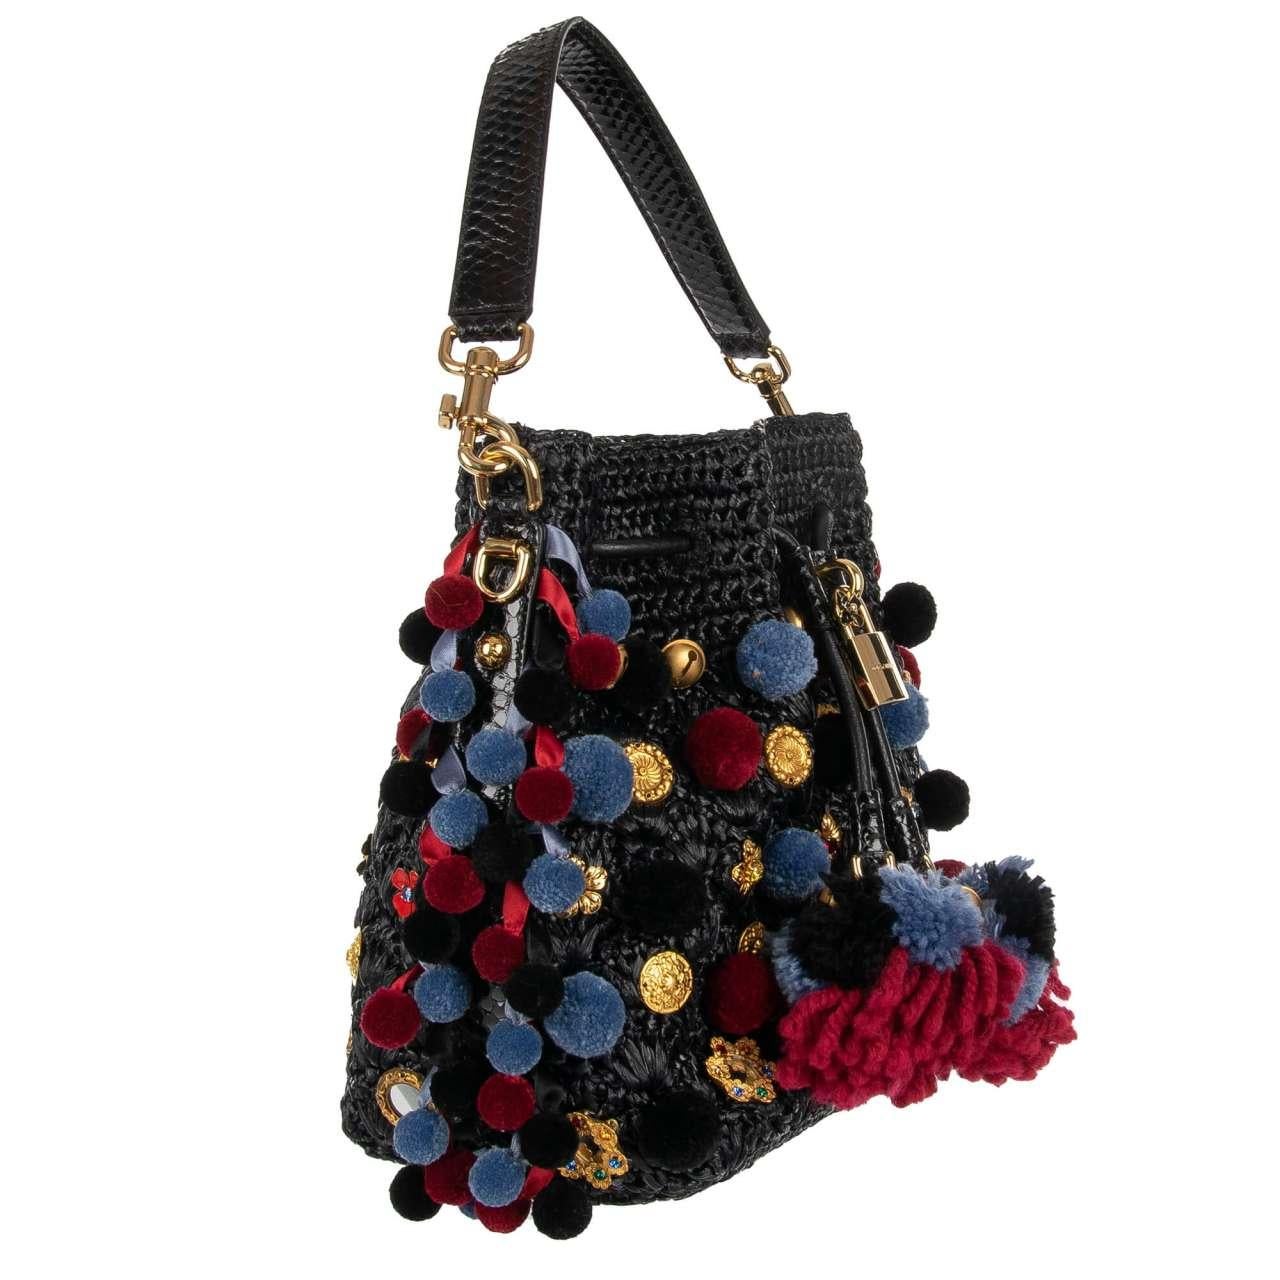 - Sicily Style straw bucket hobo bag / shoulder bag CLAUDIA with two snakeskin straps embellished with pompoms, sing-song bells, crystals and enamel flowers by DOLCE & GABBANA - New with Tag, Dustbag, Authenticity Card - Former RRP: EUR 4.450 -